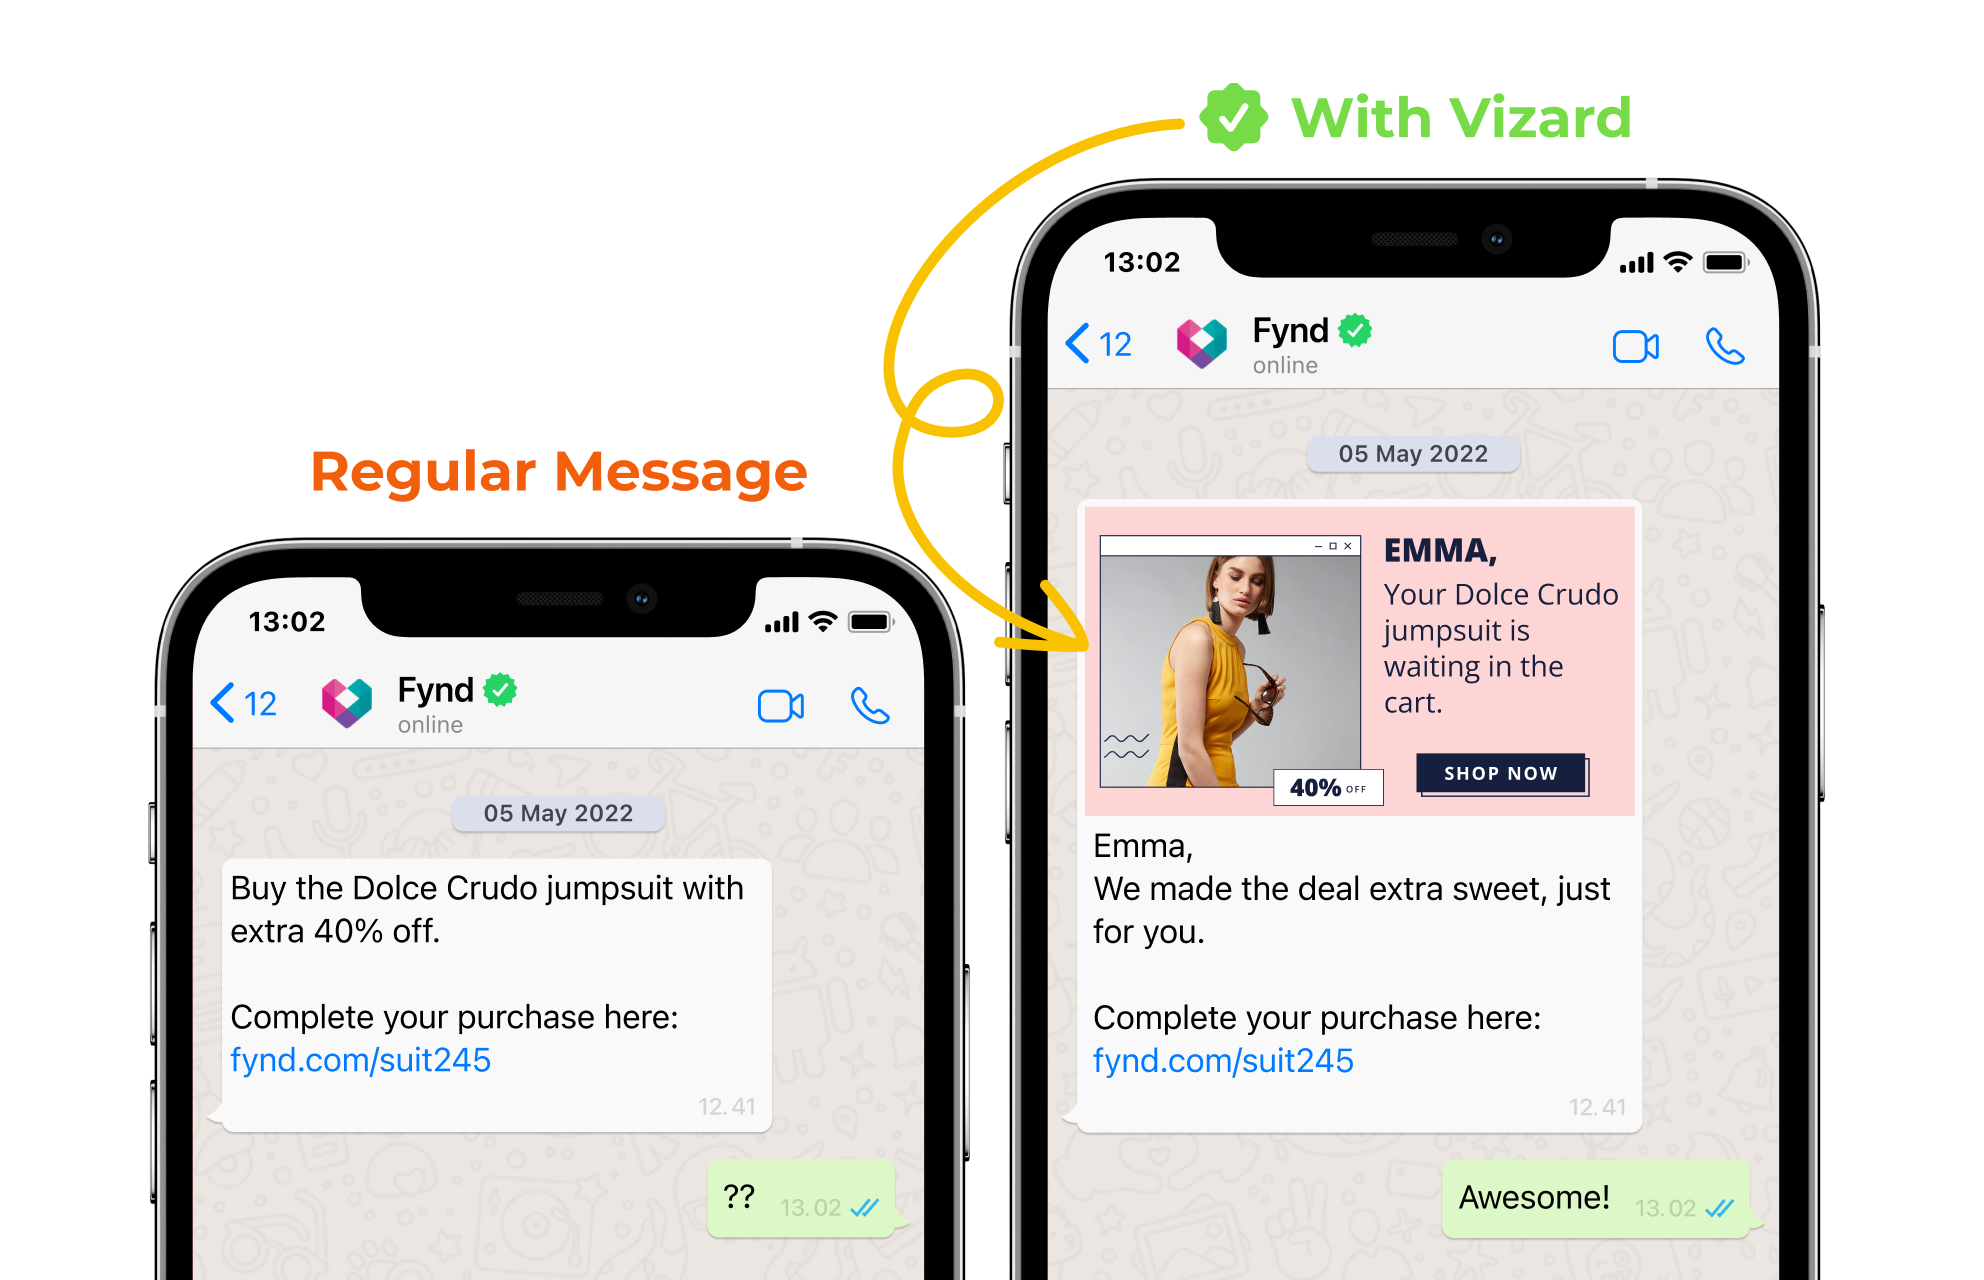 Personalized Image template created using Vizard and delivered through WhatsApp to the target audience